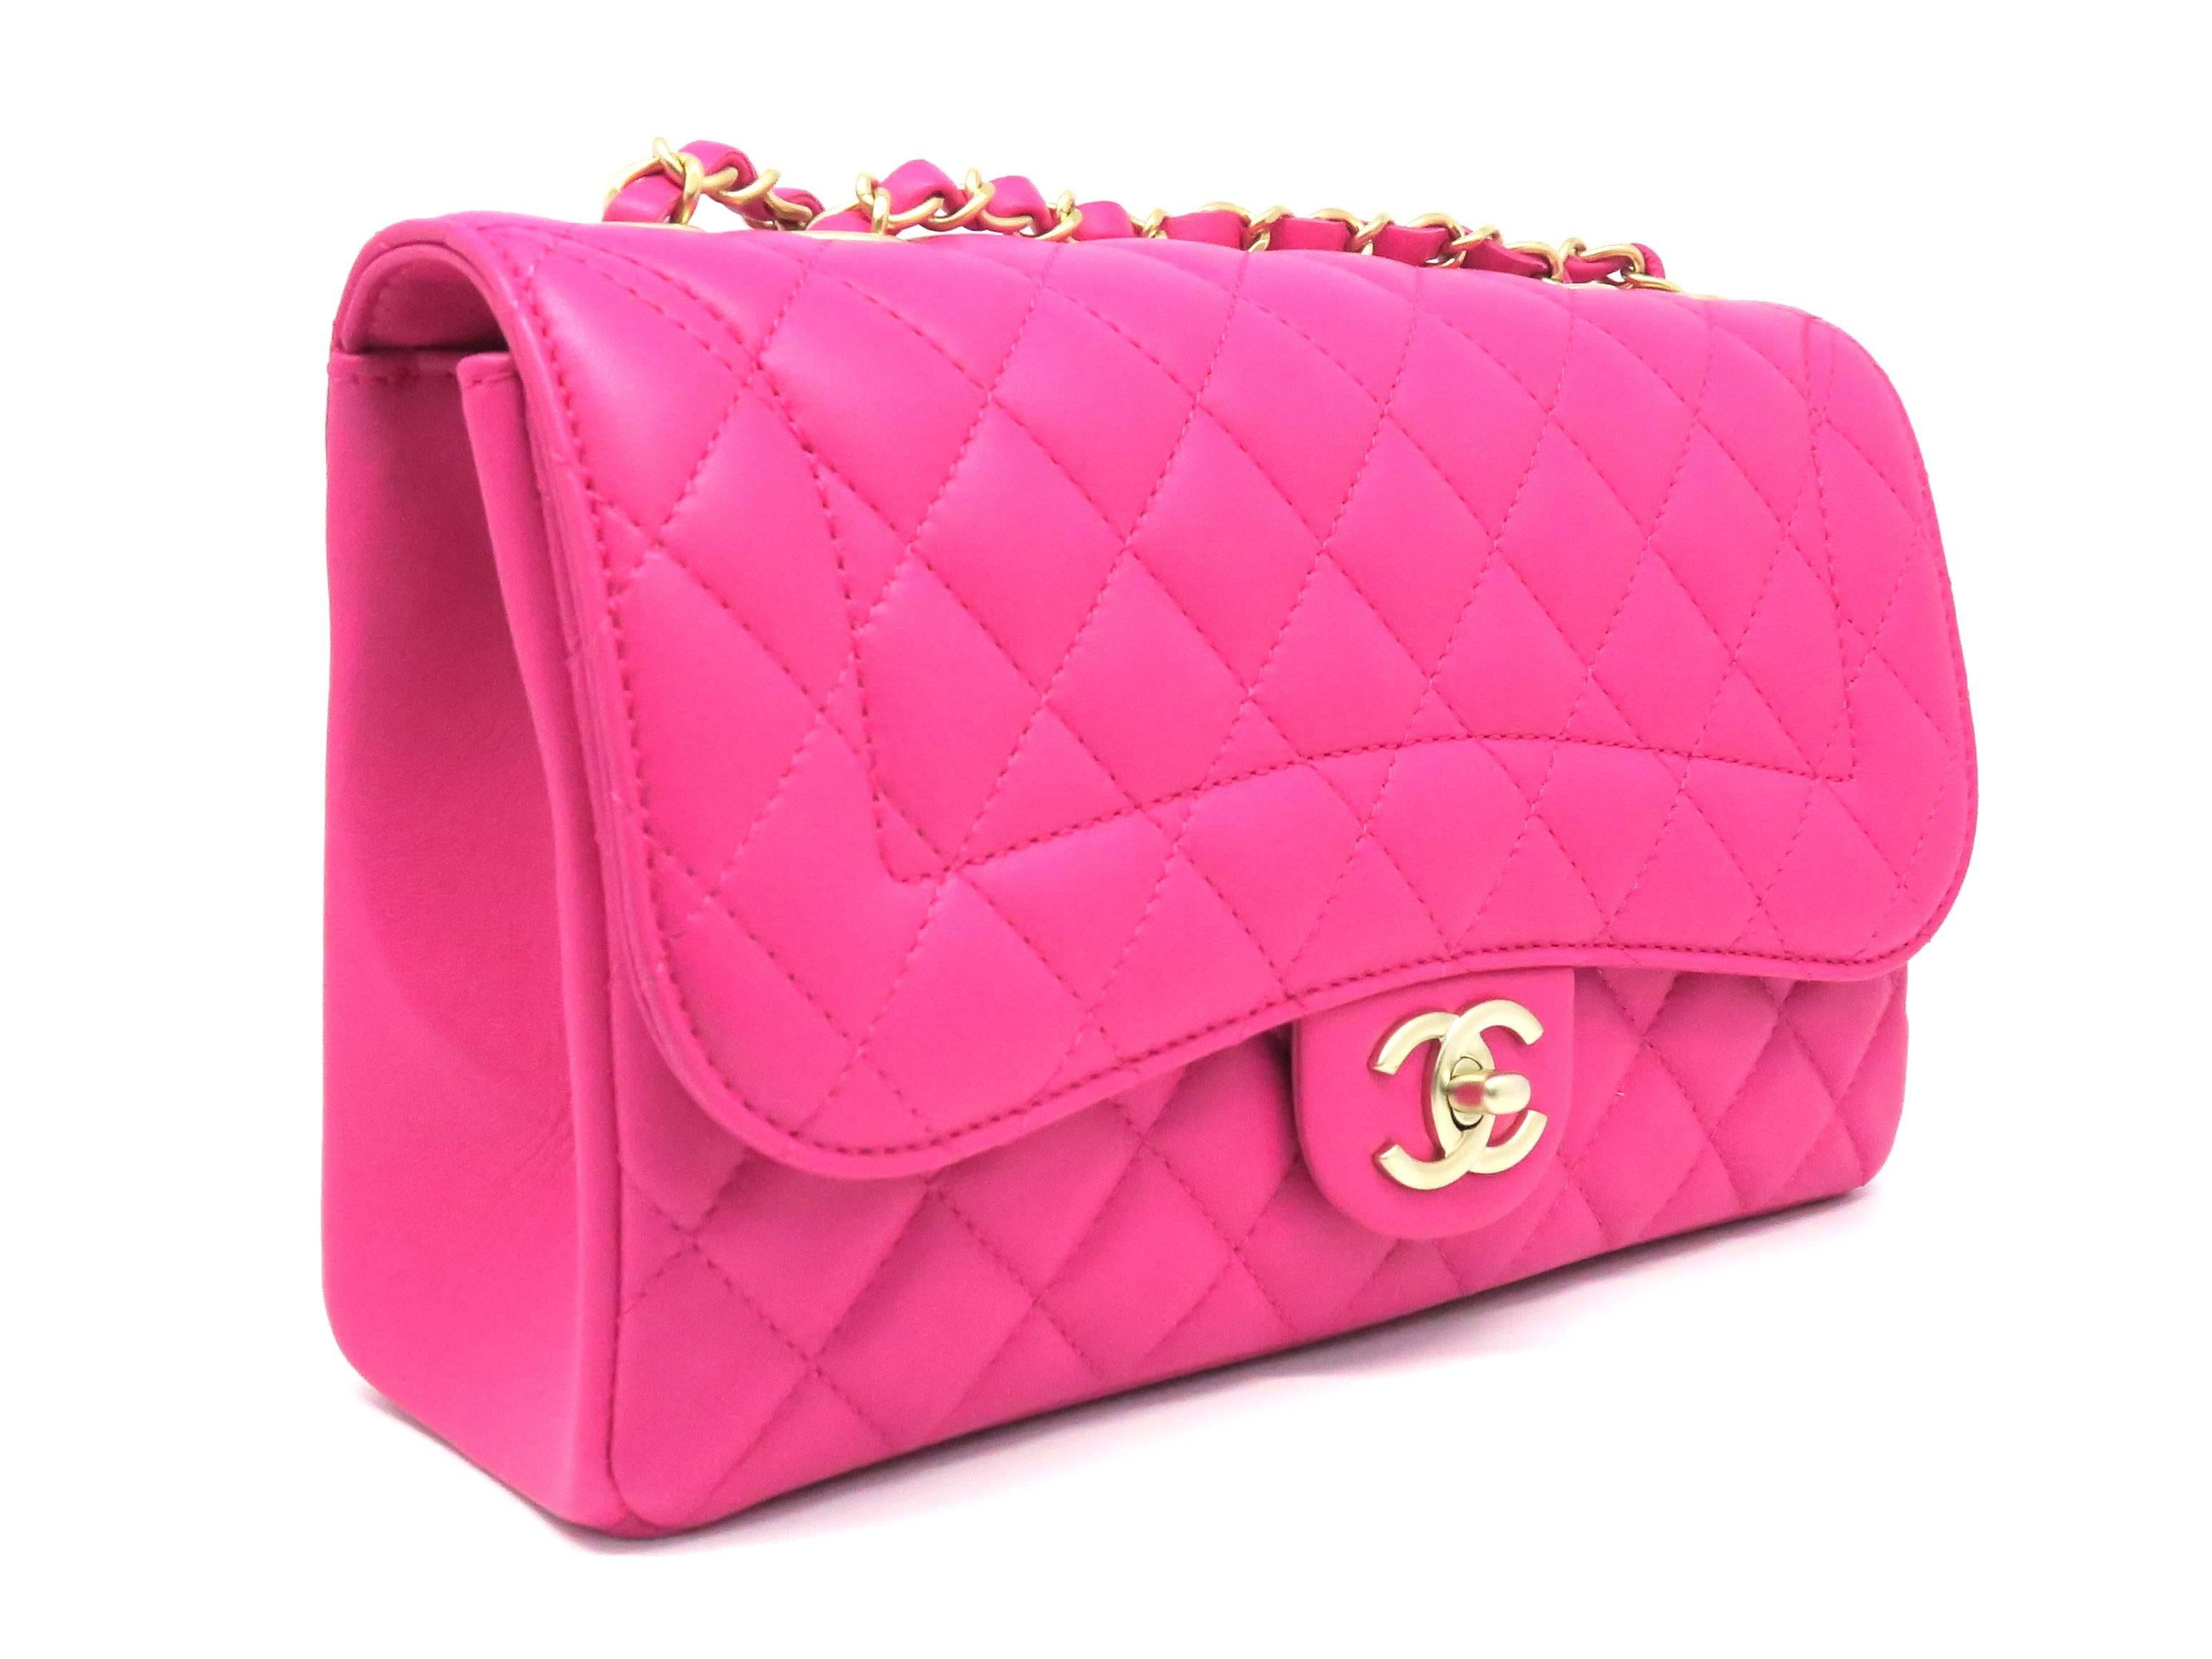 Color: Fuchsia

Material: Quilted Lambskin Leather

Condition: Rank N 
Overall: Brand New
Surface: Good
Corners: Good
Edges: Good
Handles/Straps: Good
Hardware: Good

Dimension: W25.5 × H15.5 × D8cm（W10.0" × H6.1" × D3.1"）
Shoulder